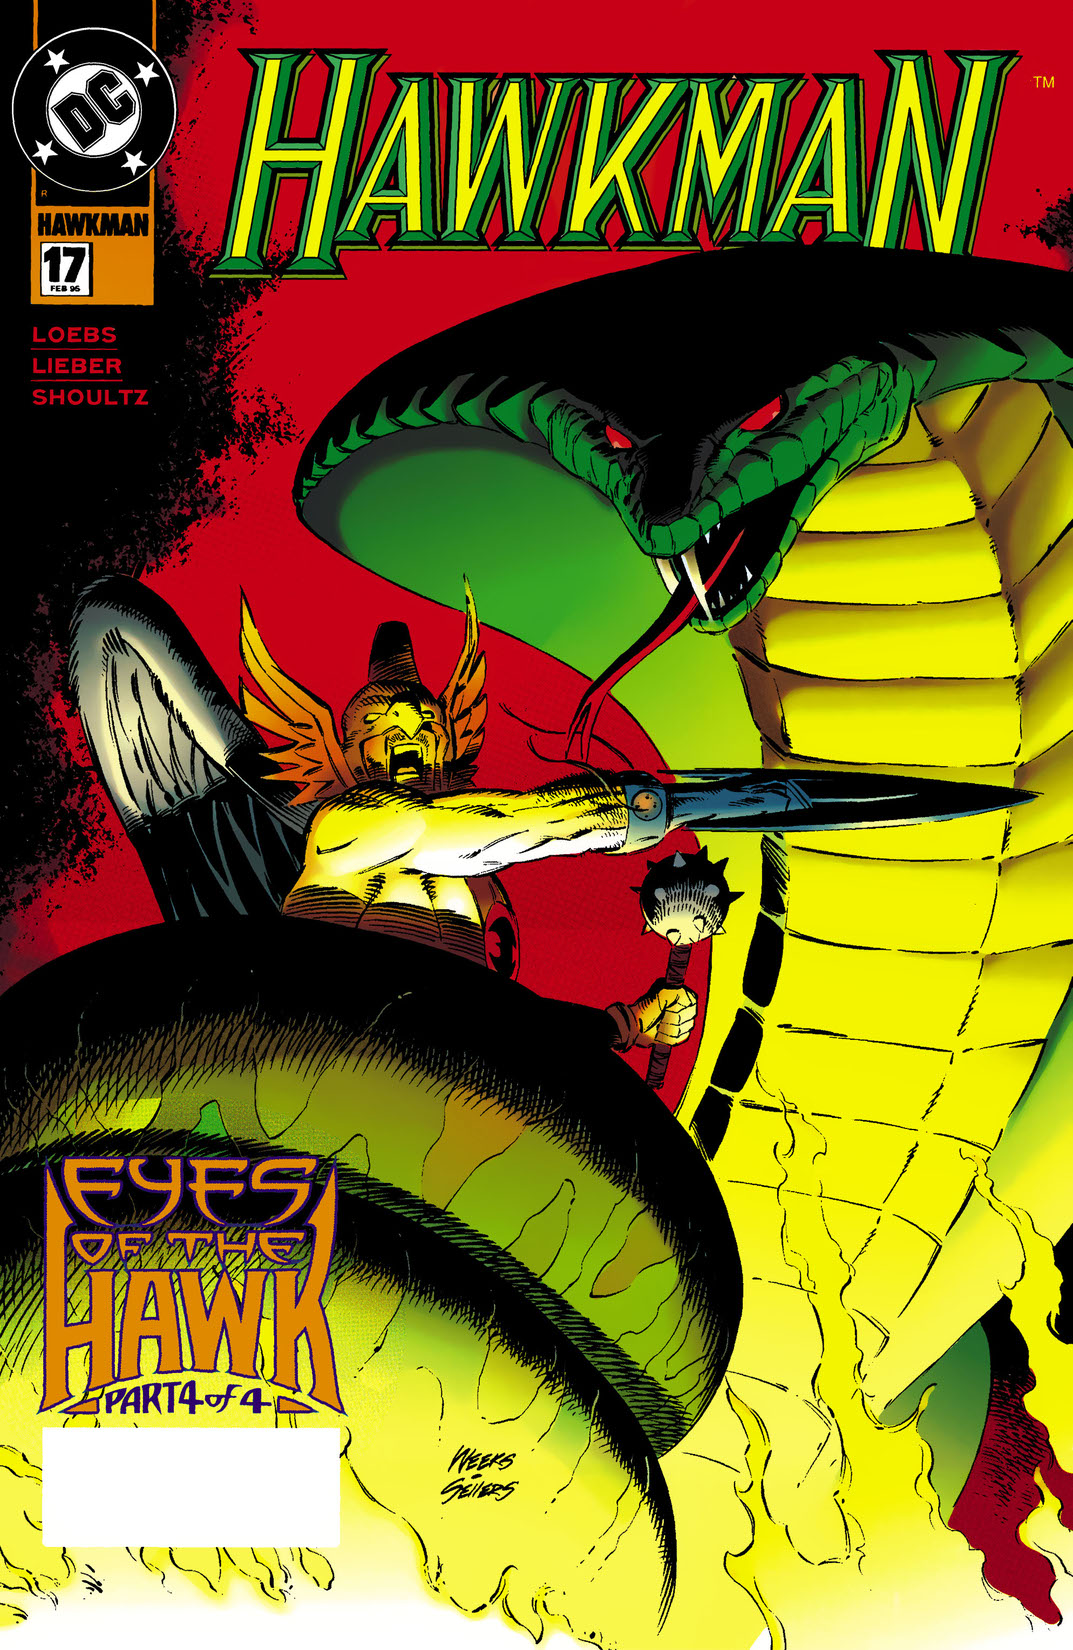 Hawkman (1993-) #17 preview images